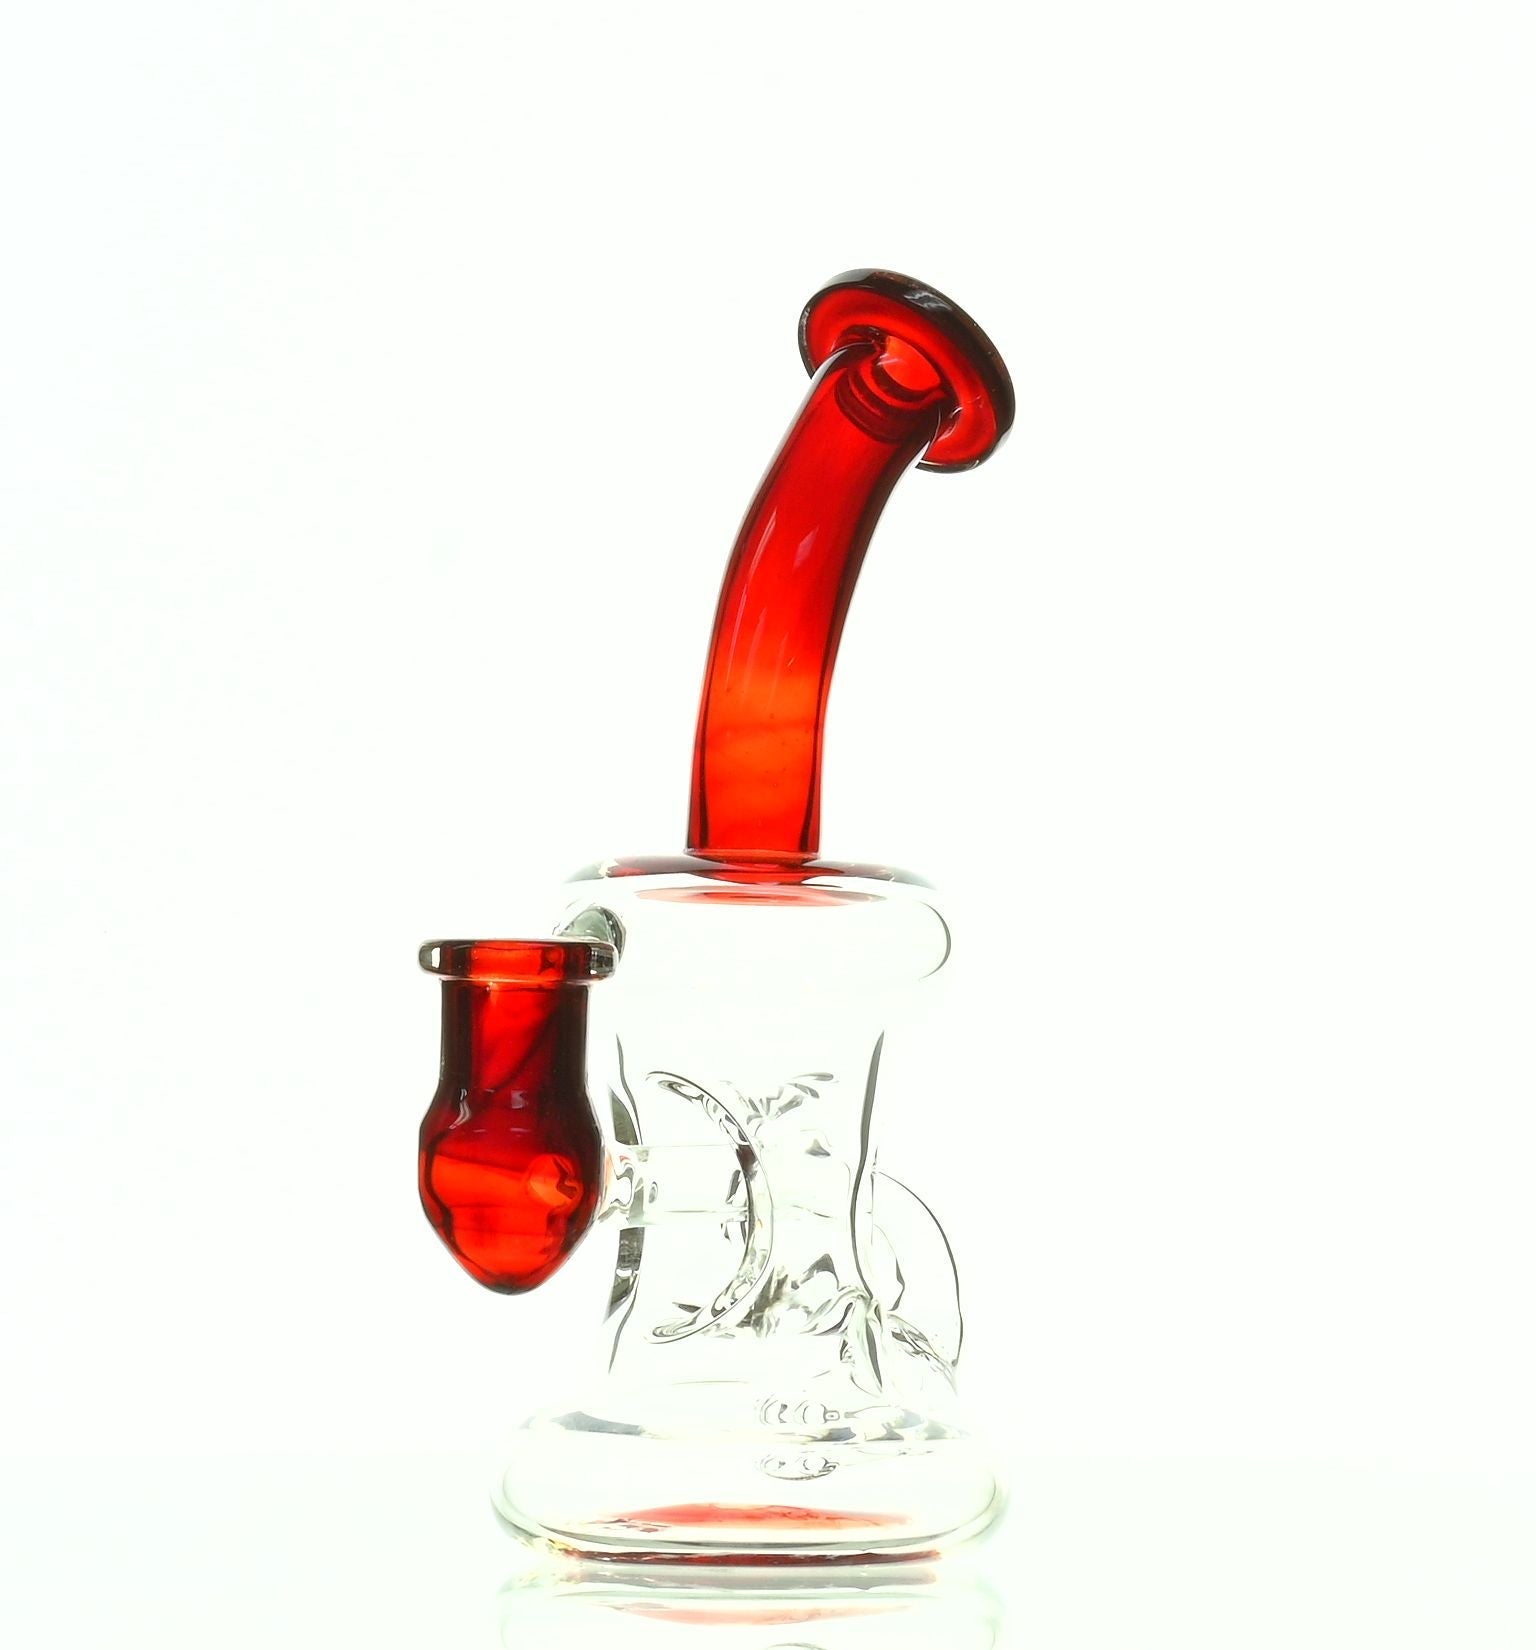 EASY G GLASS PASSTHROUGH RIG #102 - SSSS